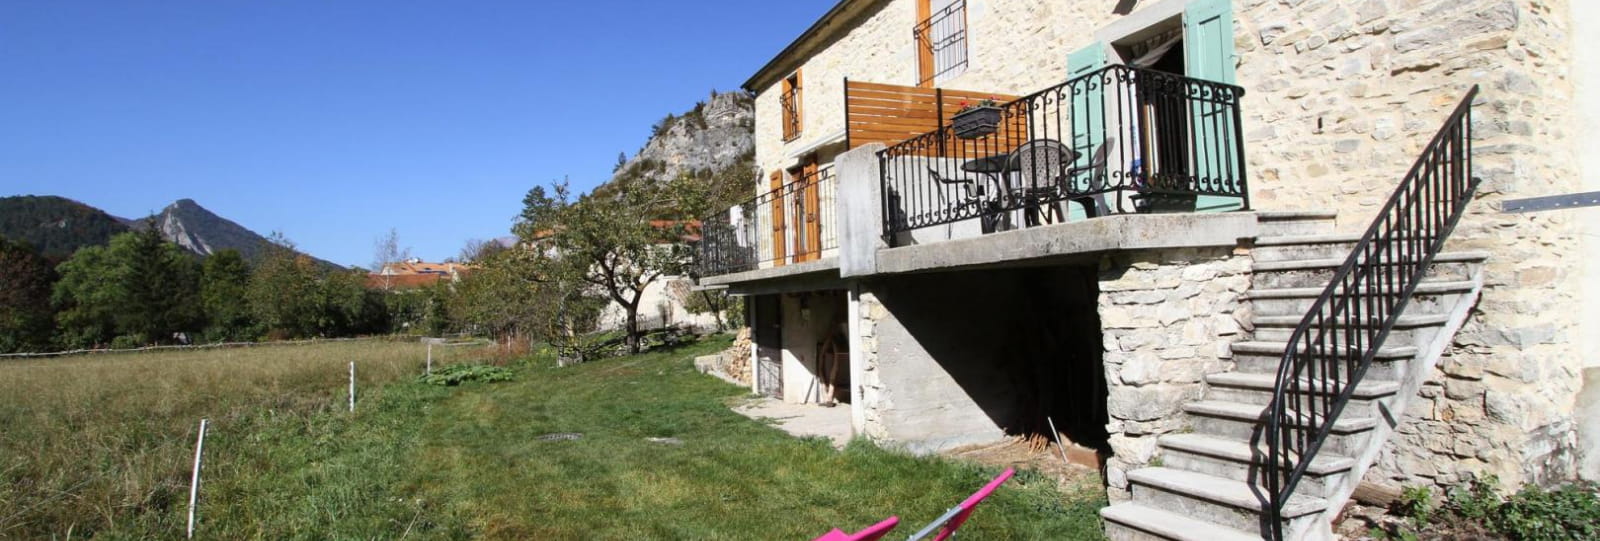 Le Bec d'Oiseau Self Catering Accommodation